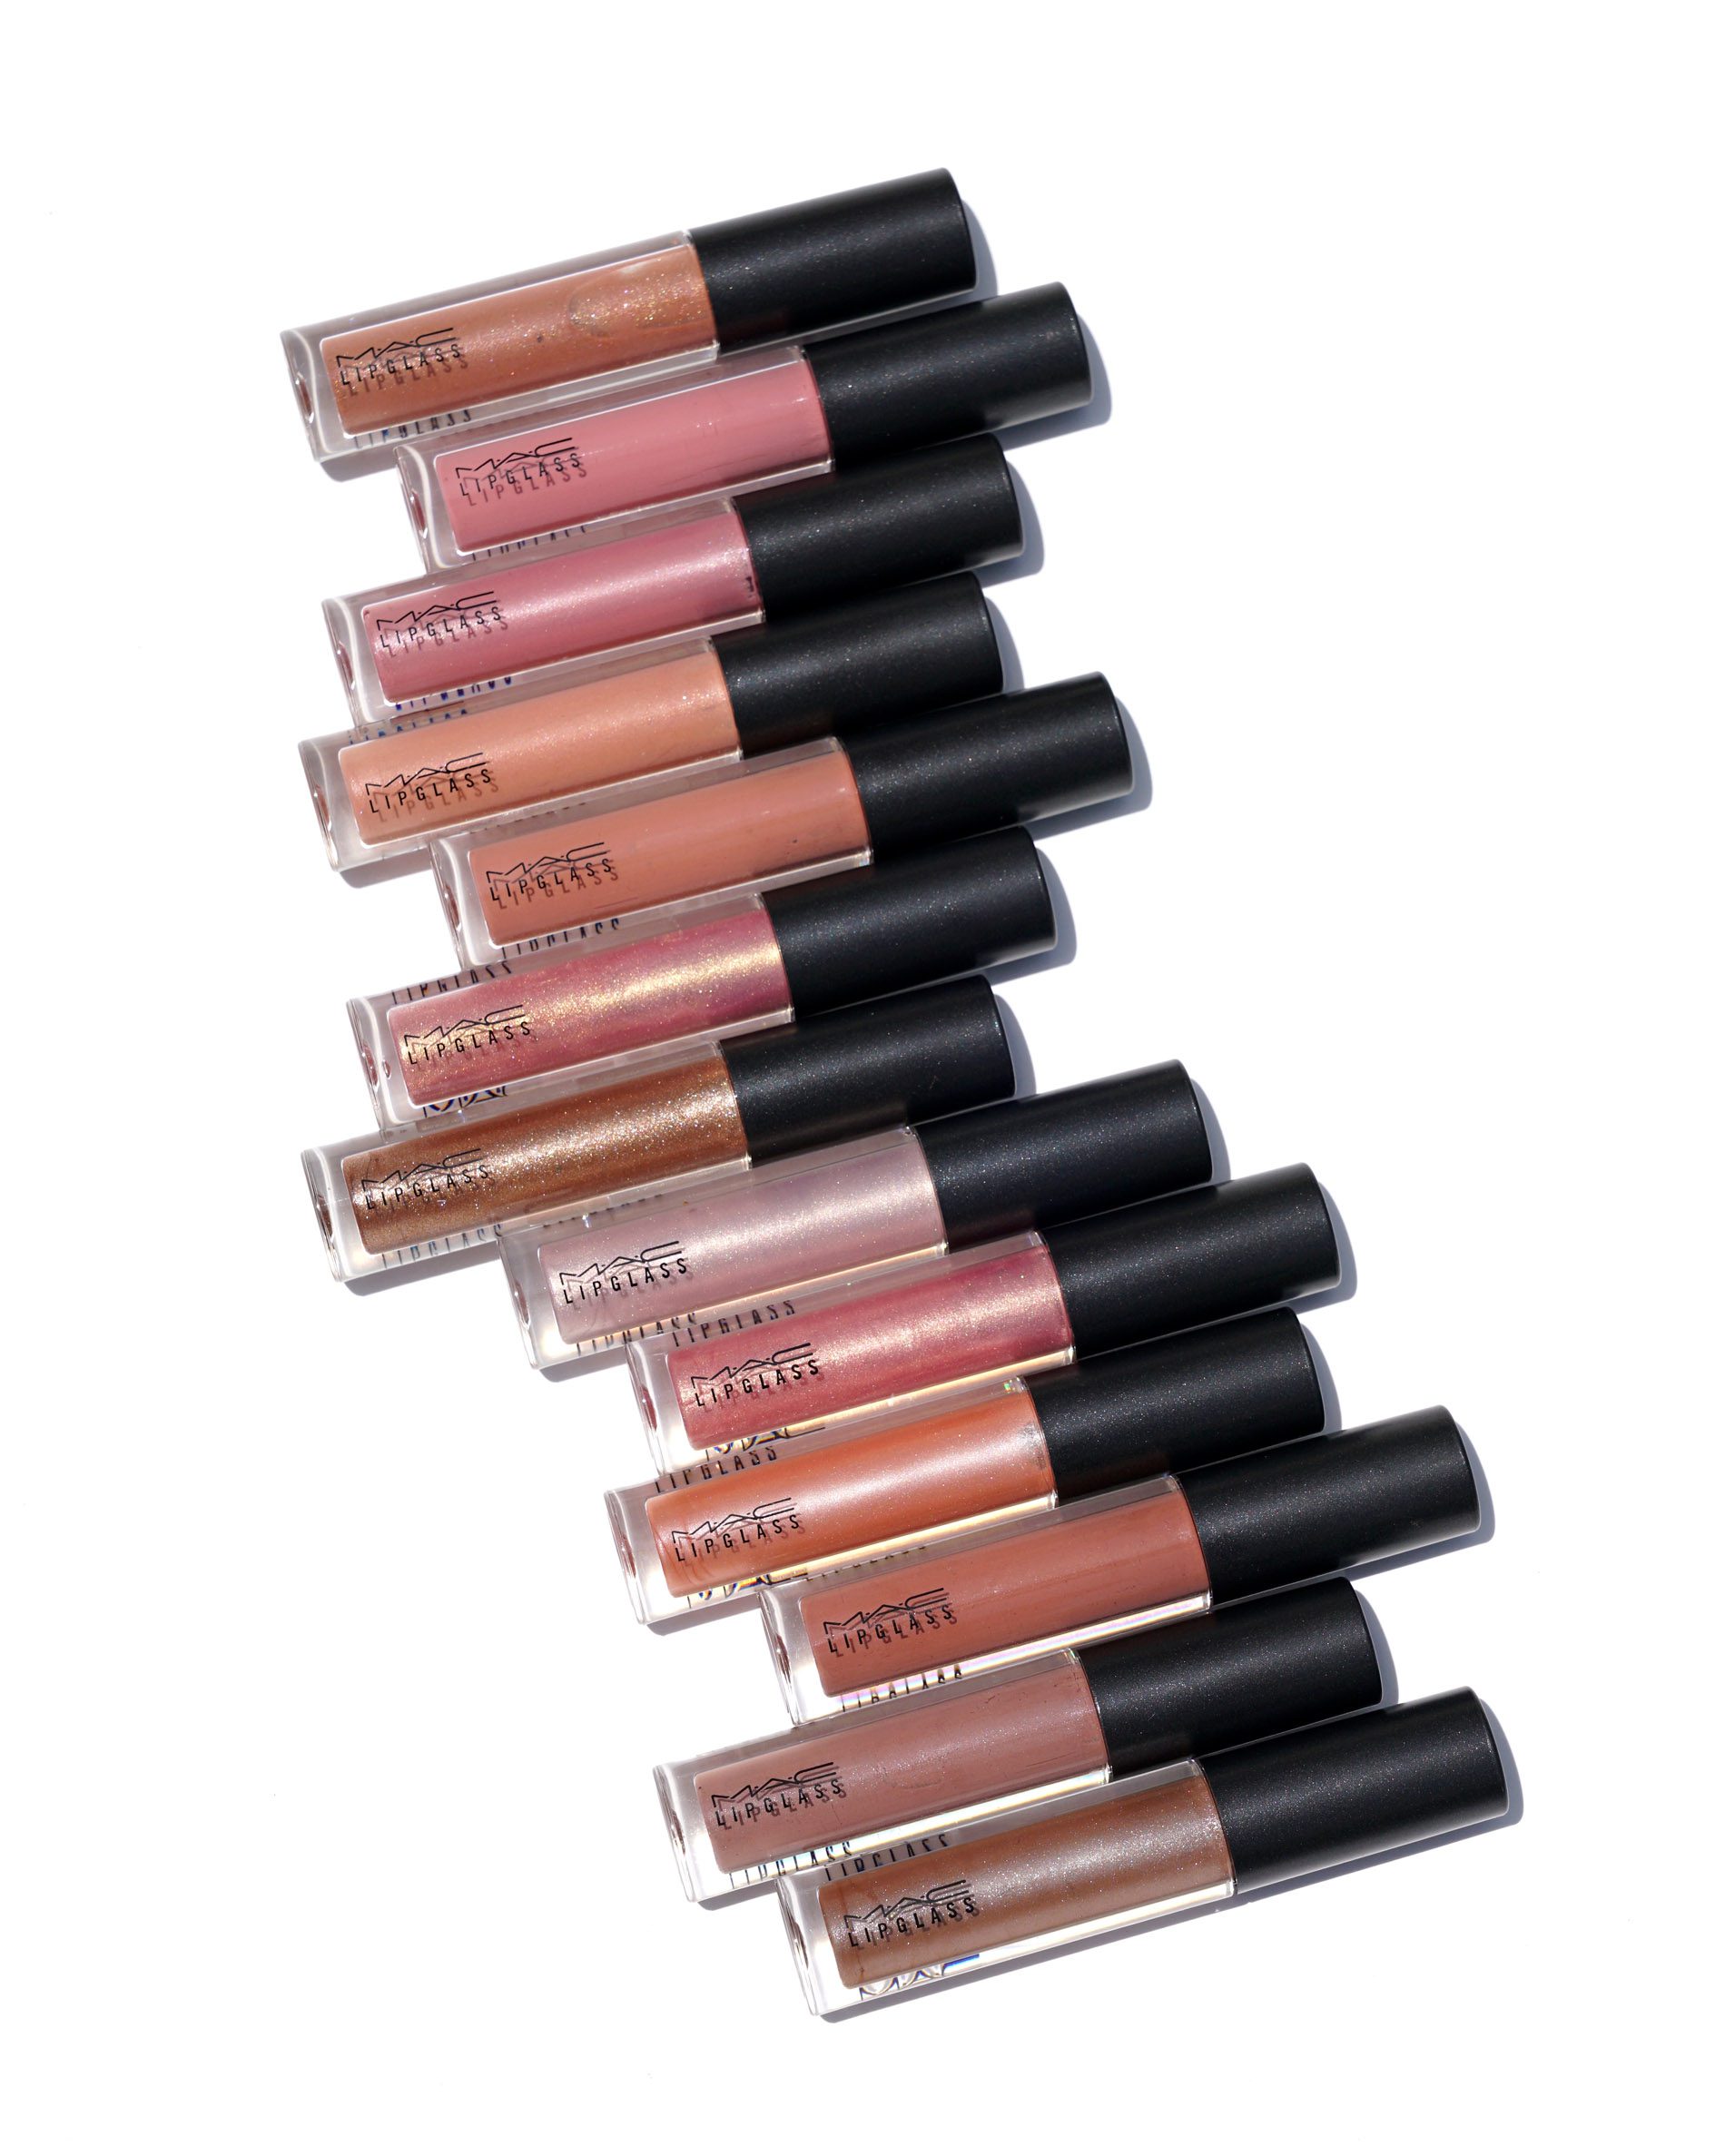 MAC Lipglass Picks and Swatches - The Beauty Look Book